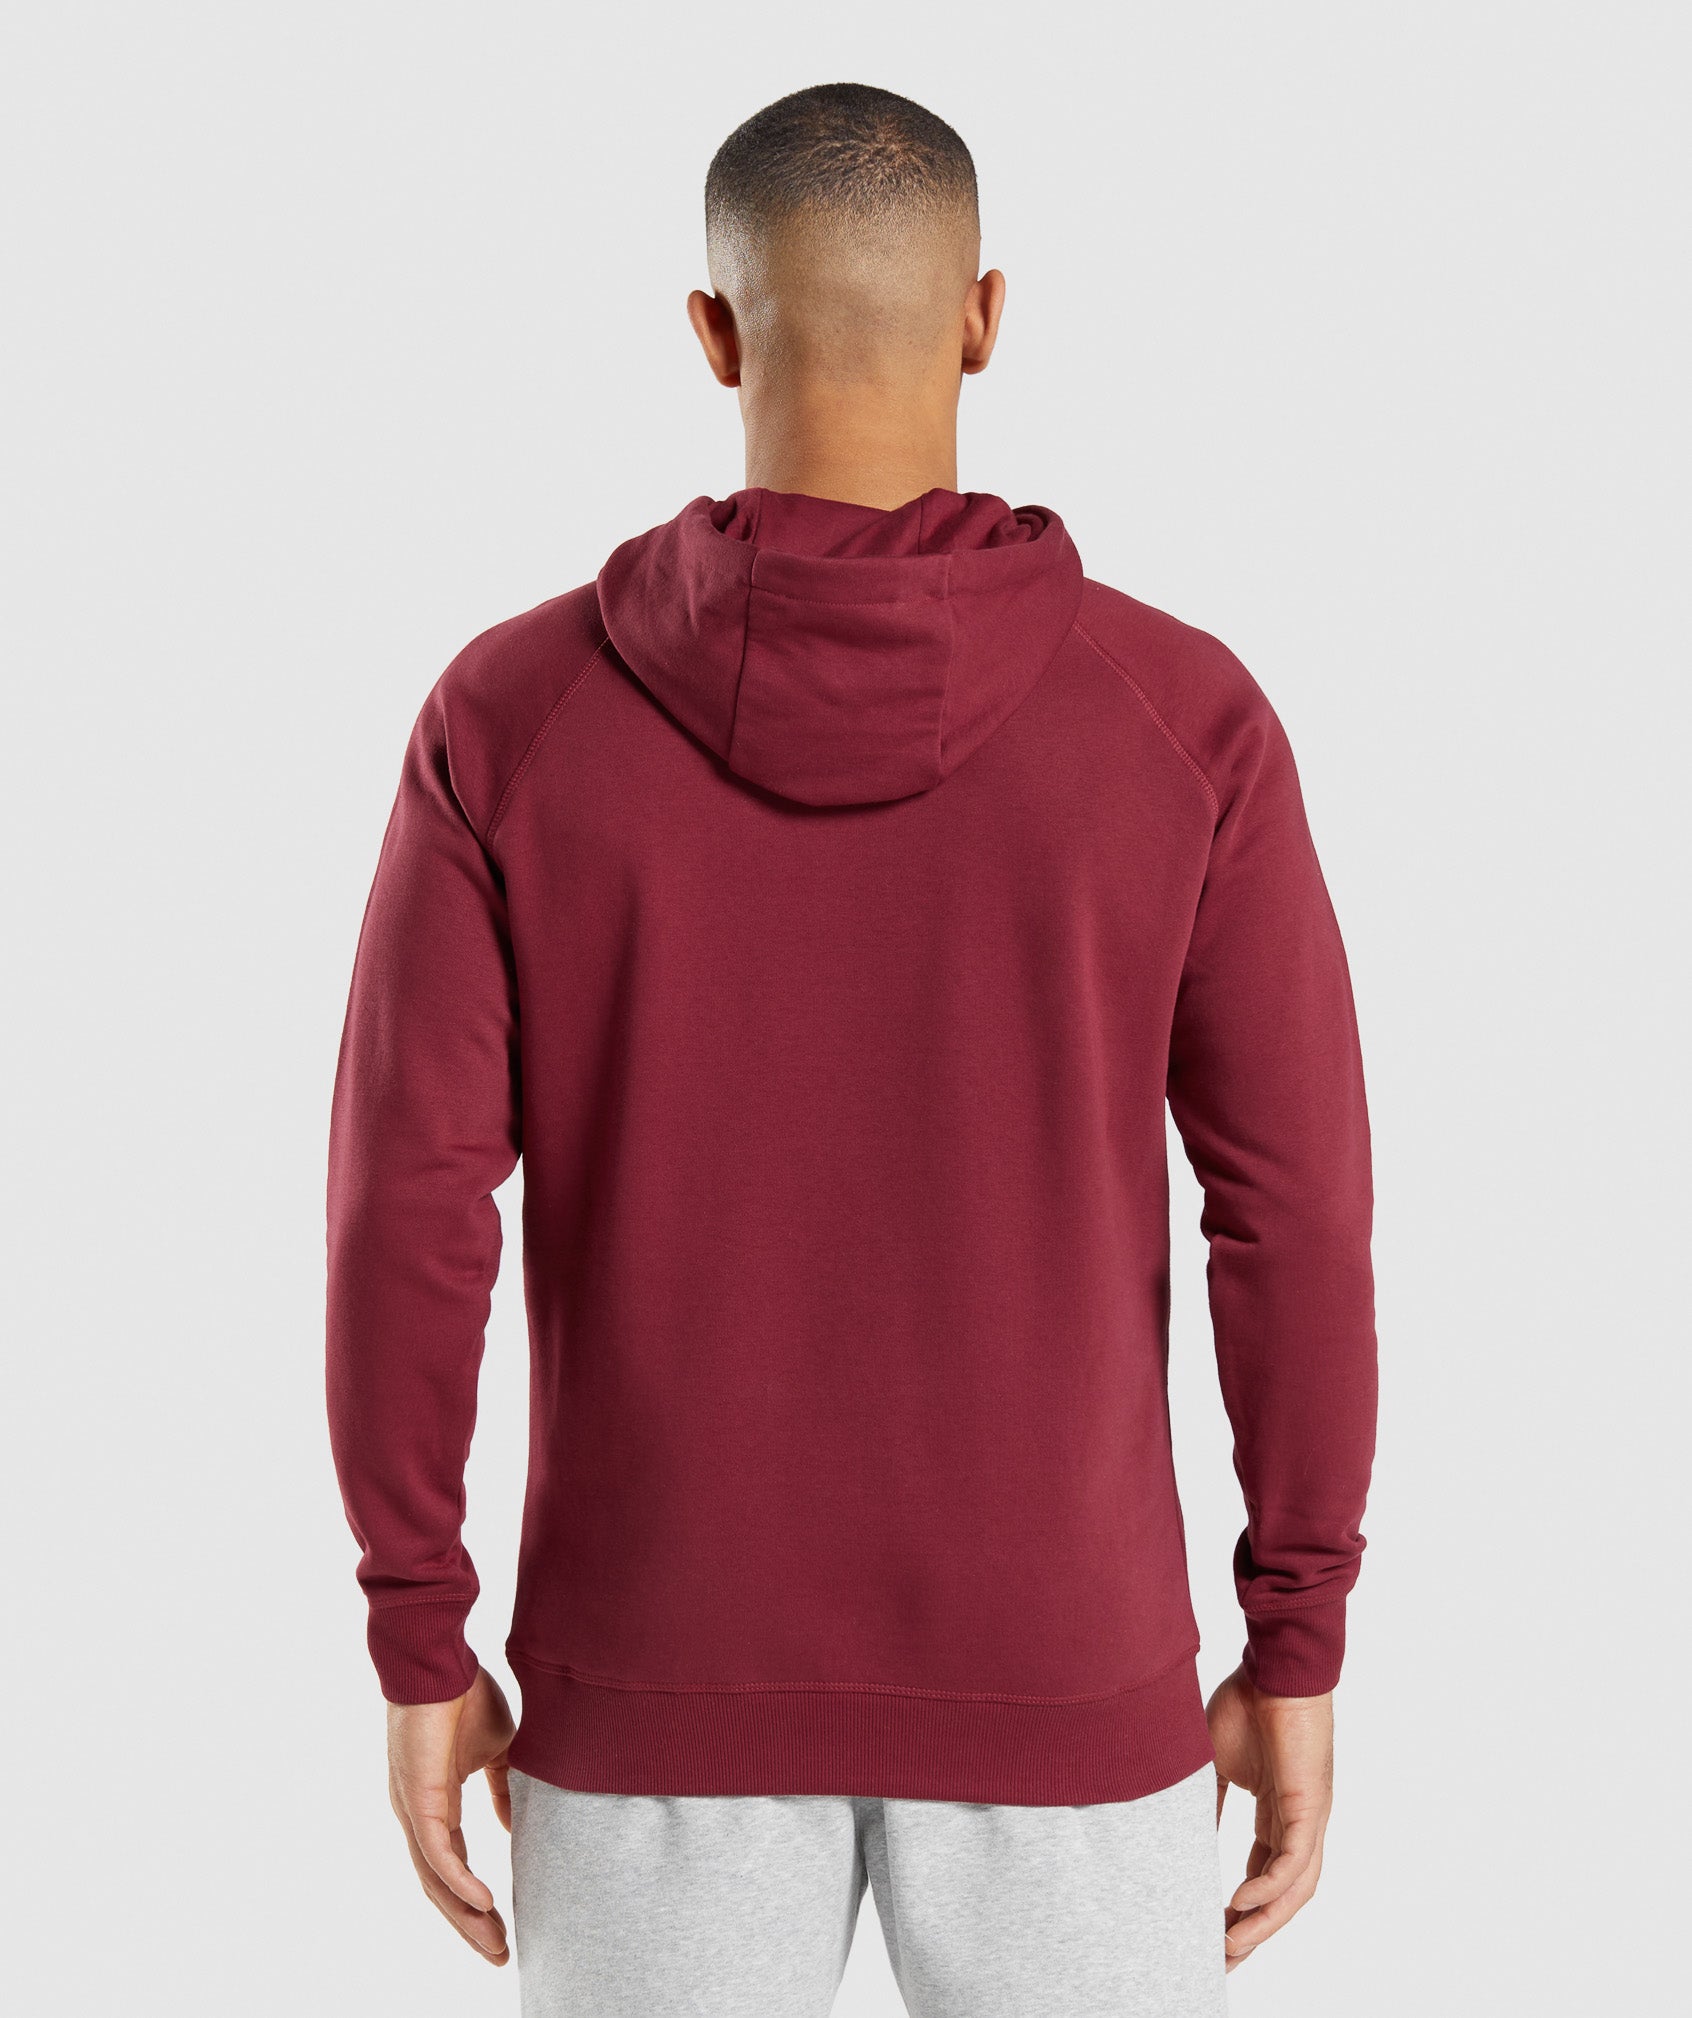 Crest Hoodie in Burgundy Red - view 3